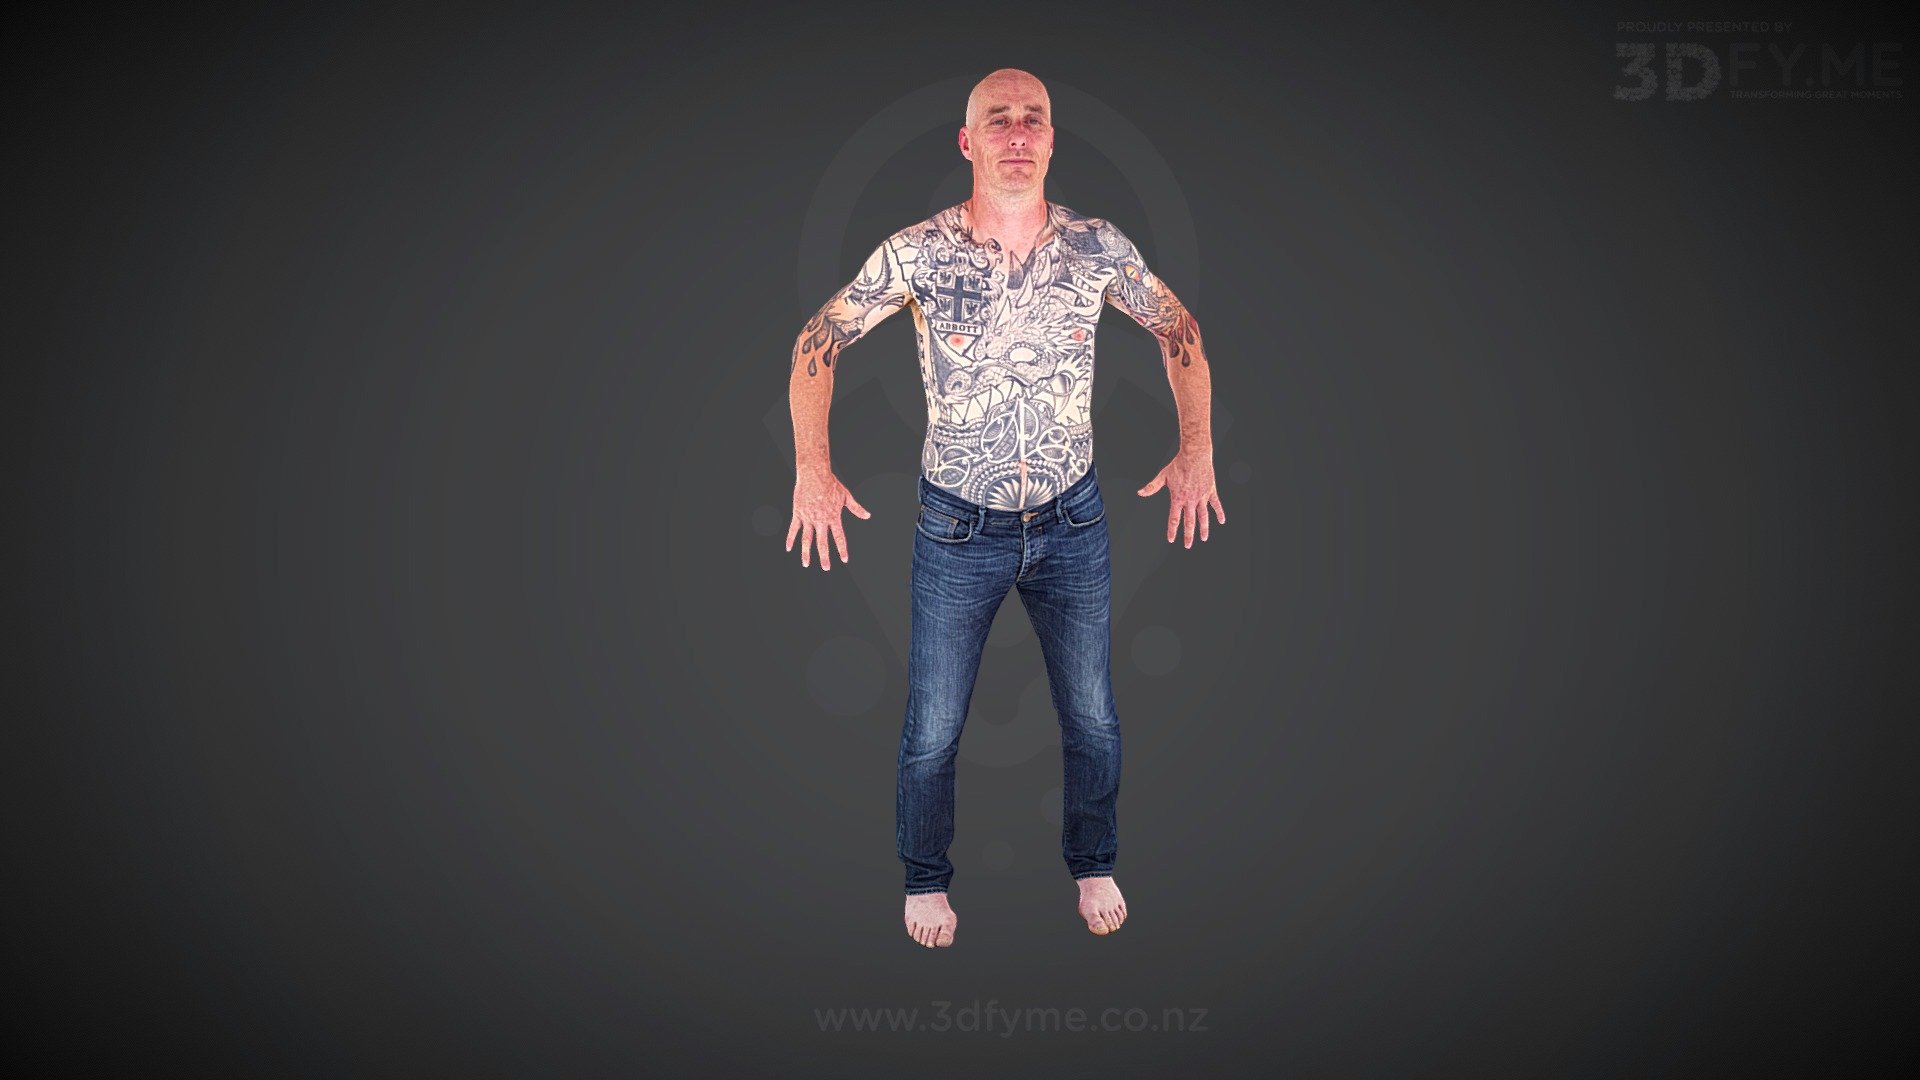 Photogrammetry scan, 140 pics (8 MP), decimated to 80k, texture re-projected (raw diffuse map, 8k) - Steve / Underground Arts Tattoo Studio - 3D model by 3Dfy.me New Zealand (@smacher2016) 3d model